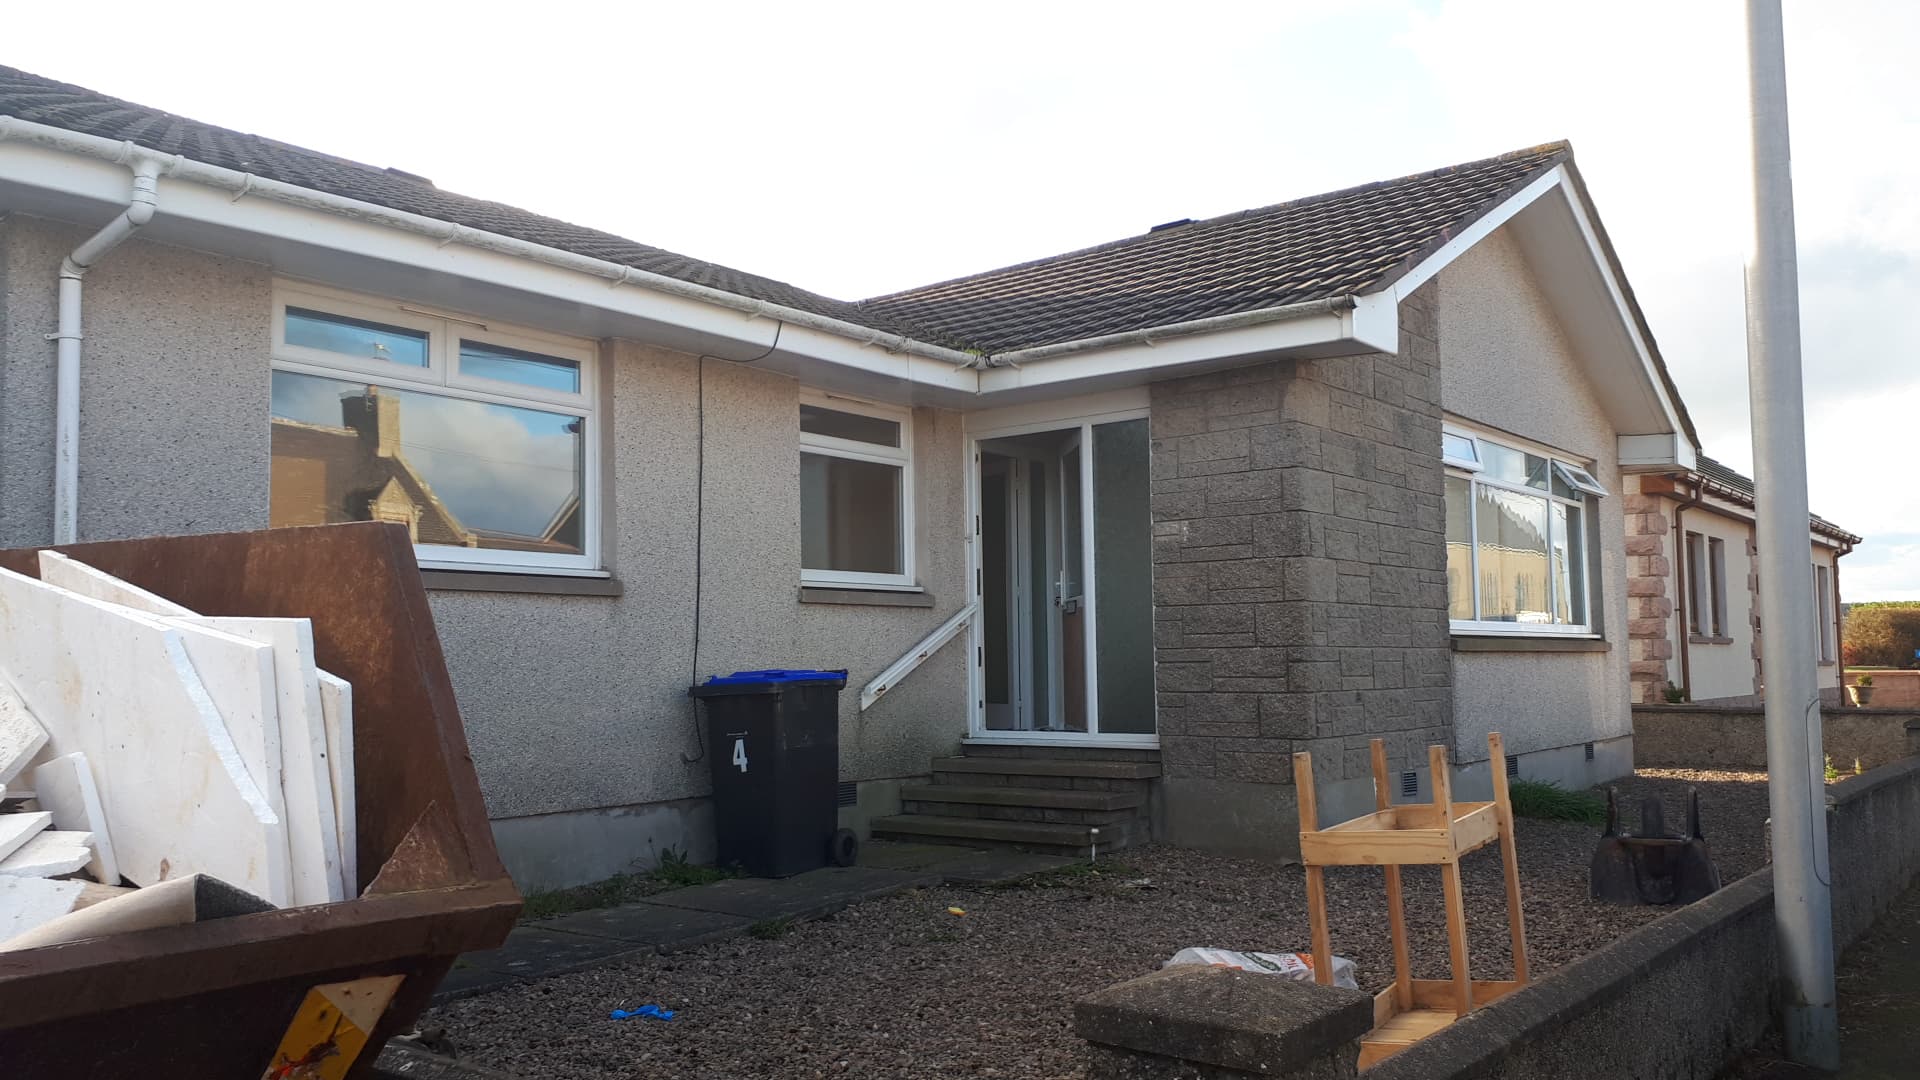 The bungalow in New Aberdour property which had been turned into a cannabis cultivation.